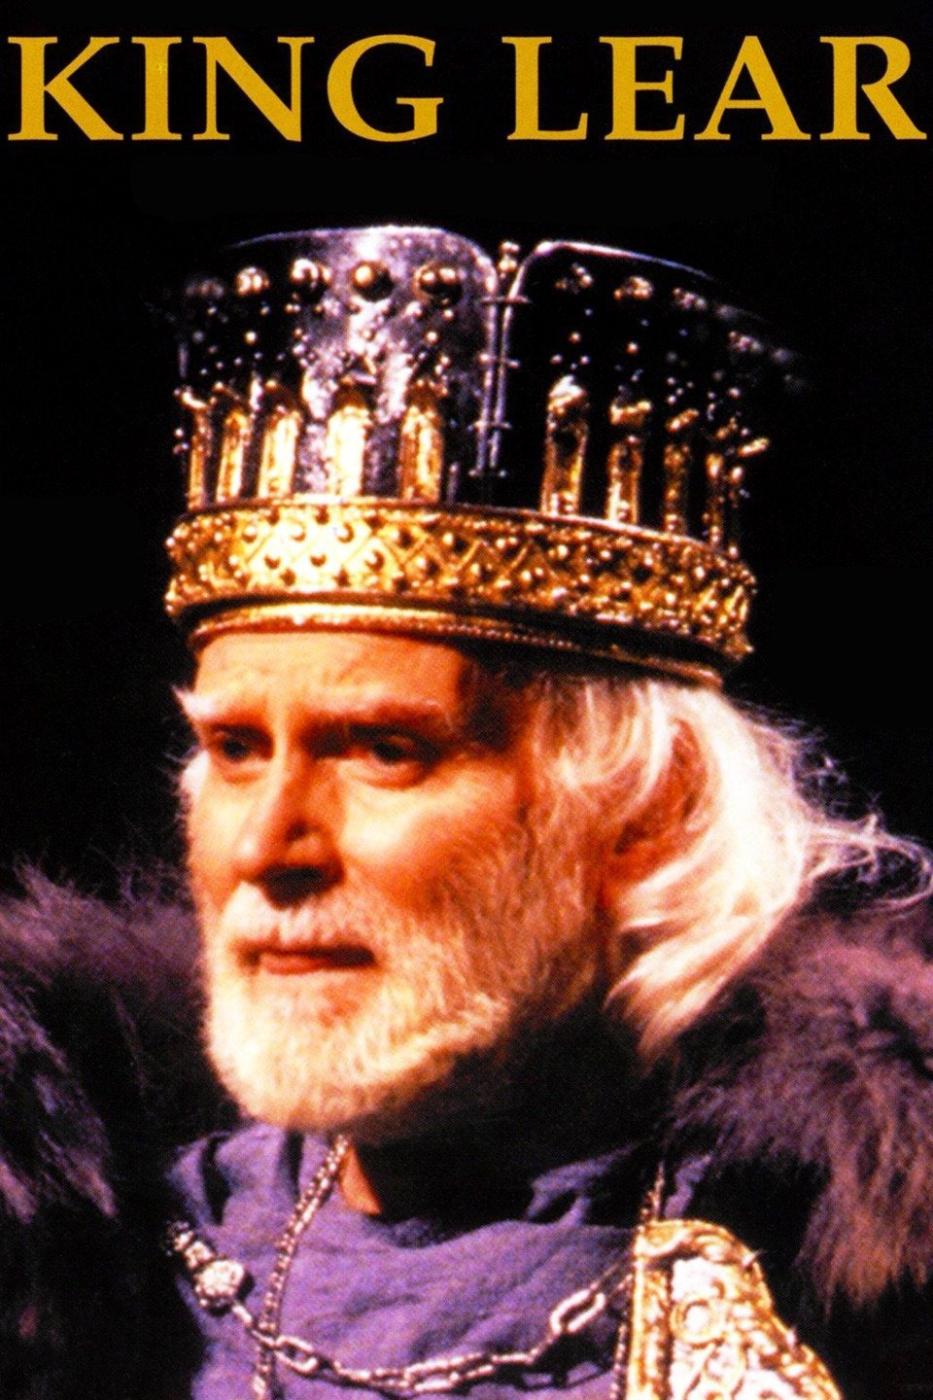 How Does Shakespeare's 'King Lear' Reflect The Political And Social Context Of His Time?